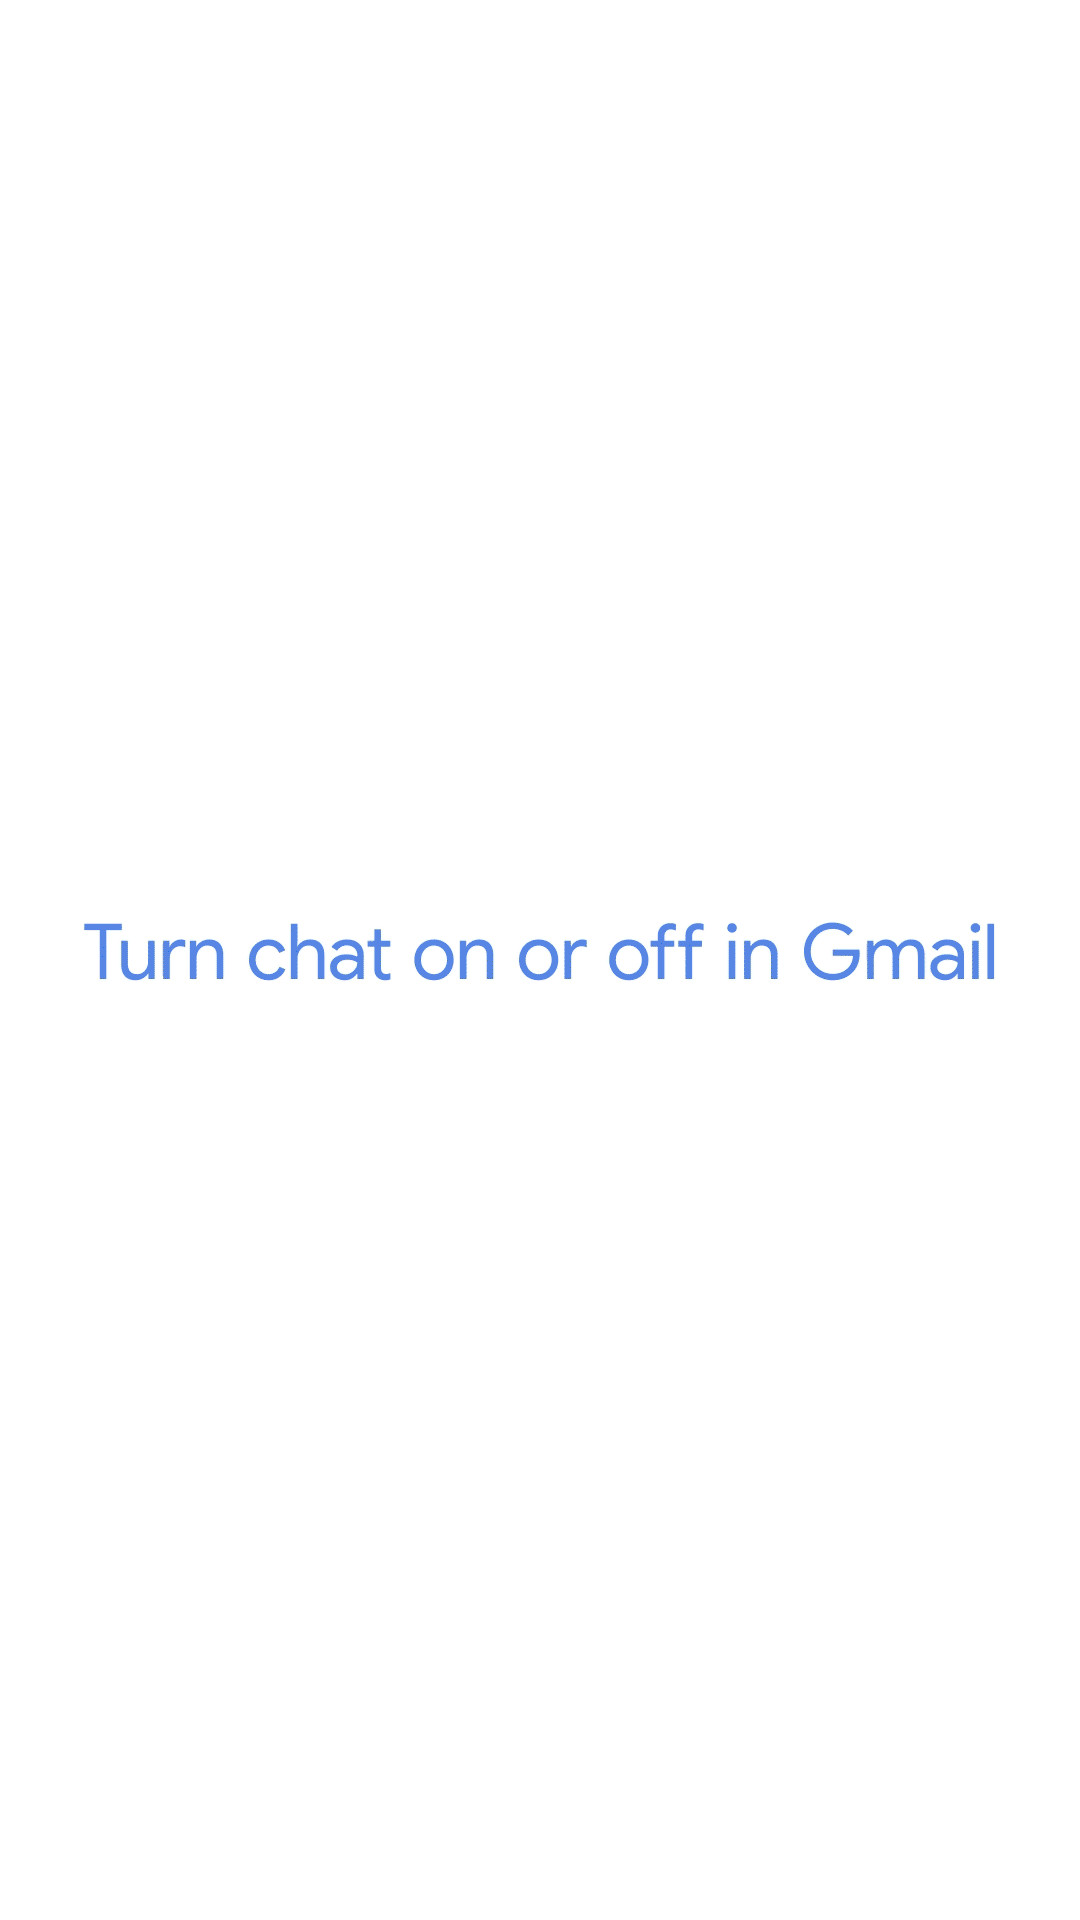 An animation showing how to turn Chat on or off in Gmail on Android